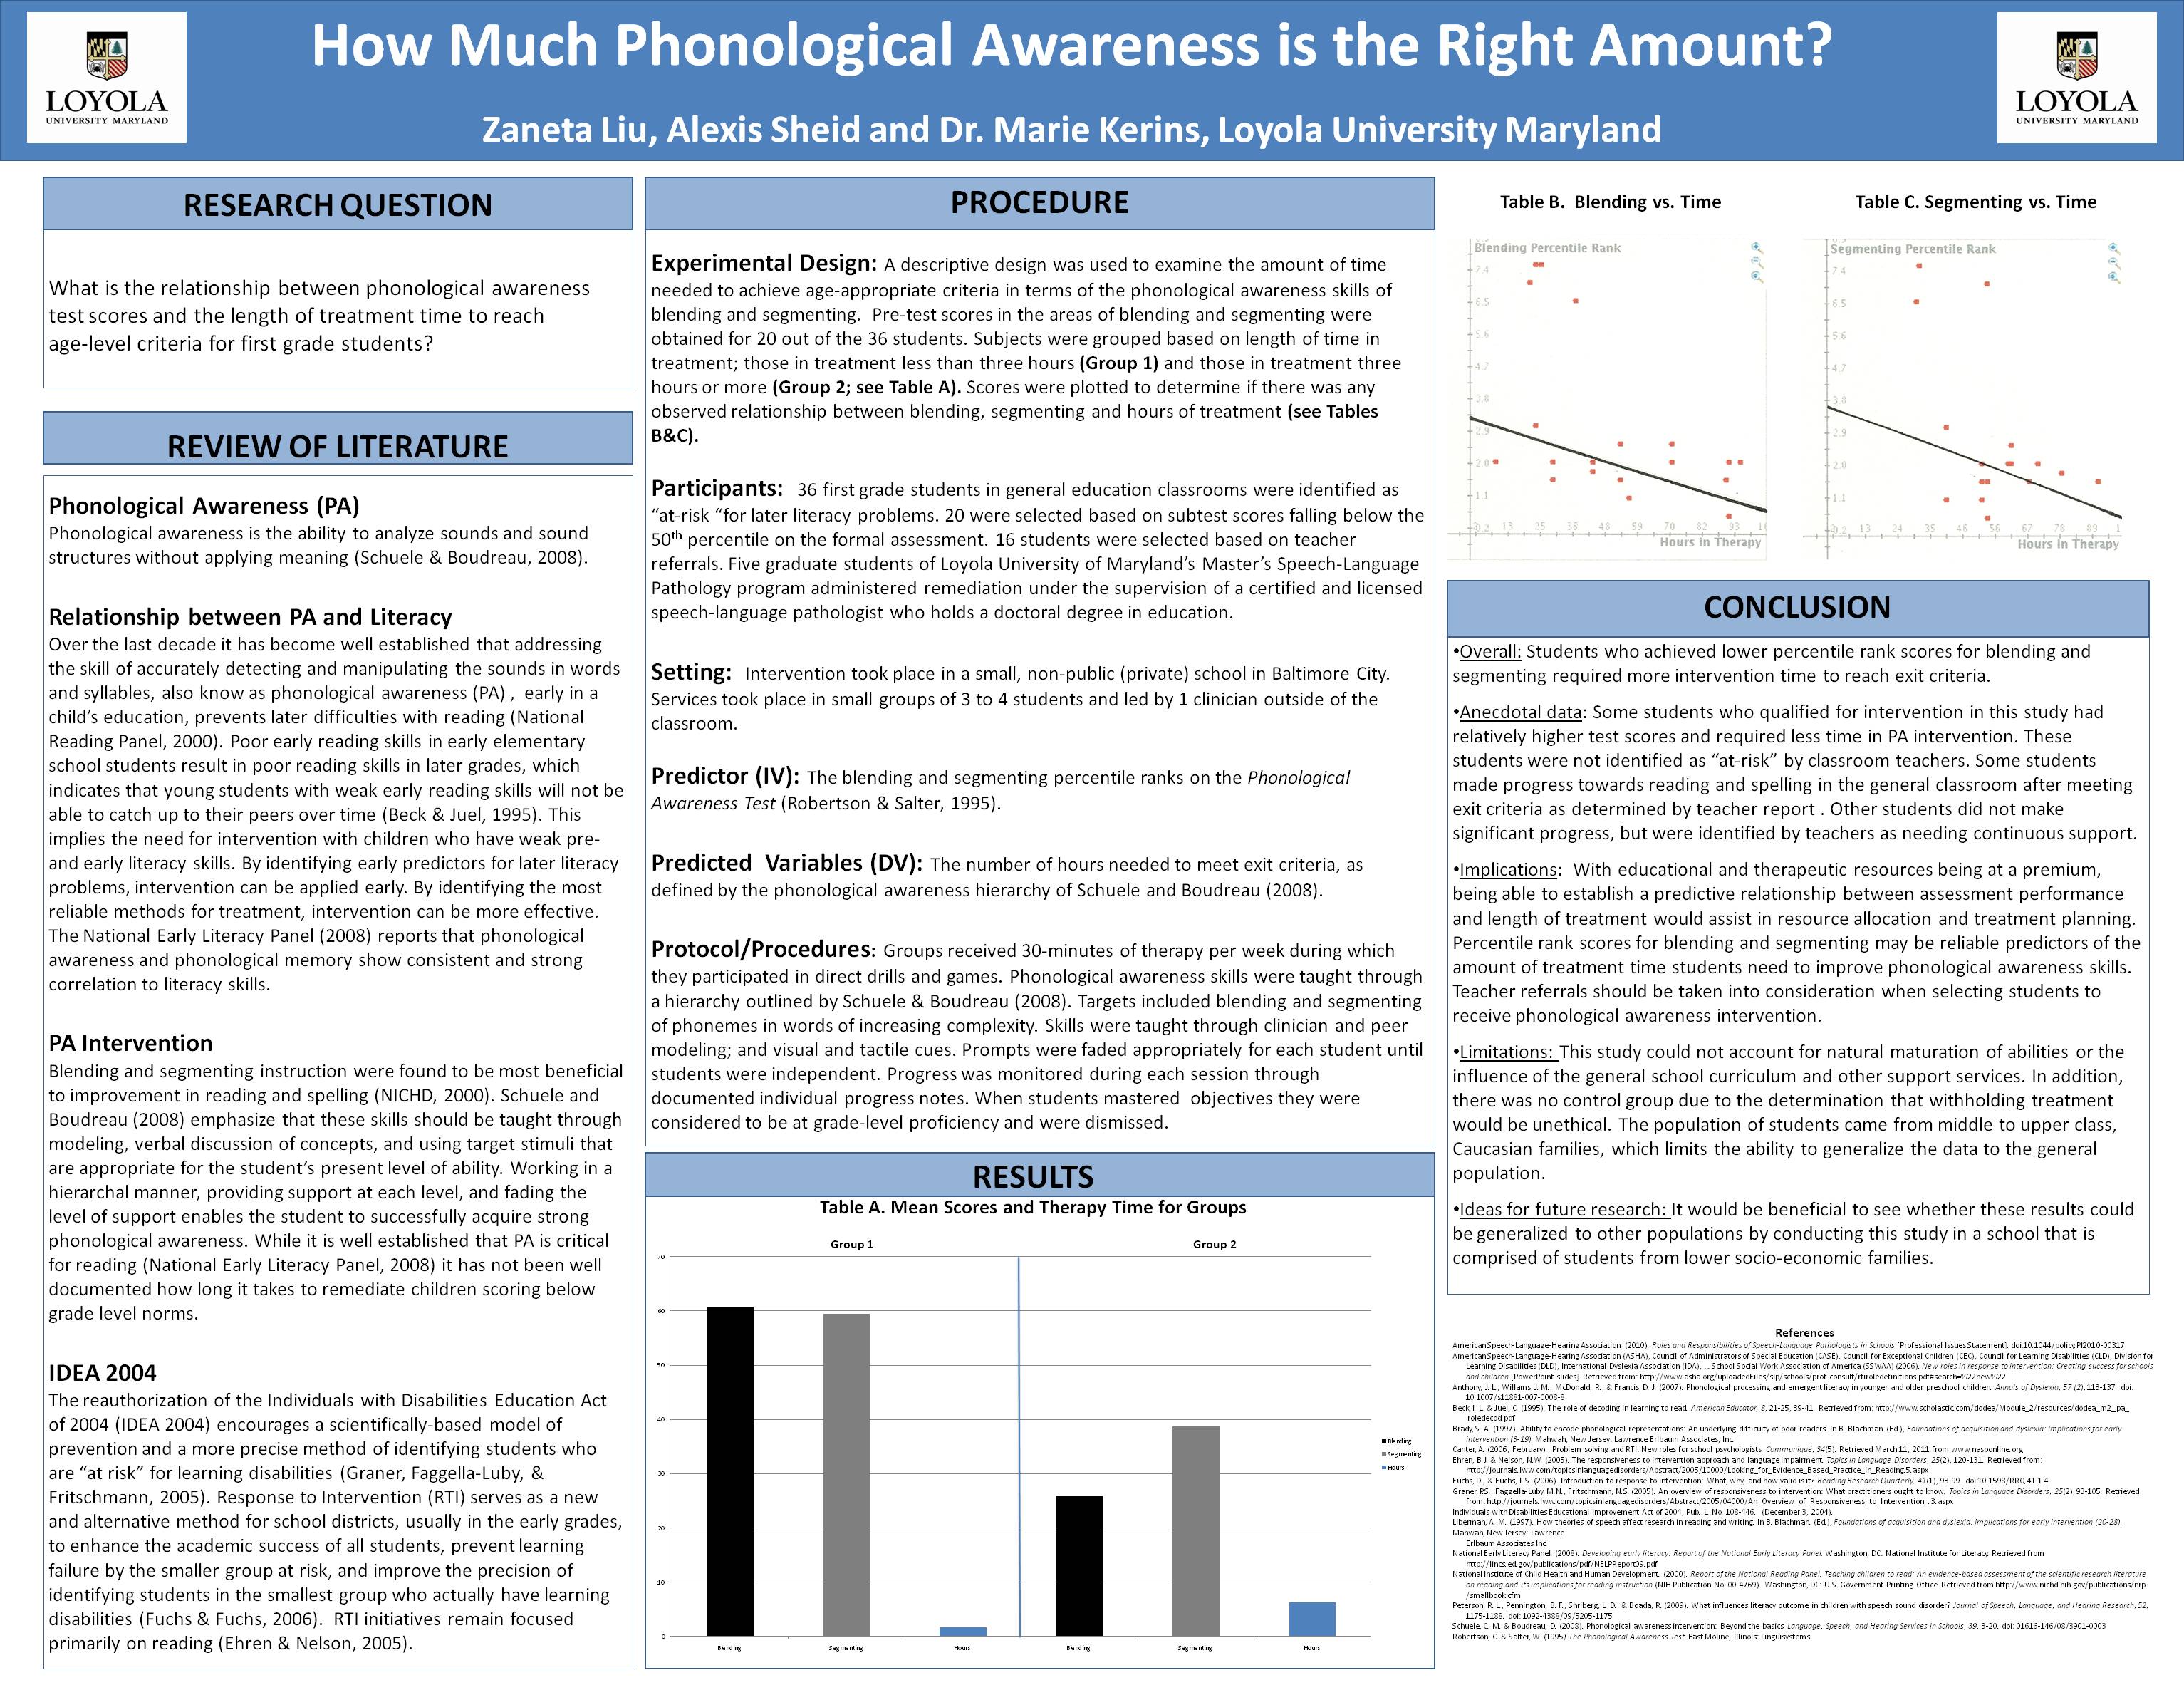 Poster image: How Much Phonological Awareness is the Right Amount?